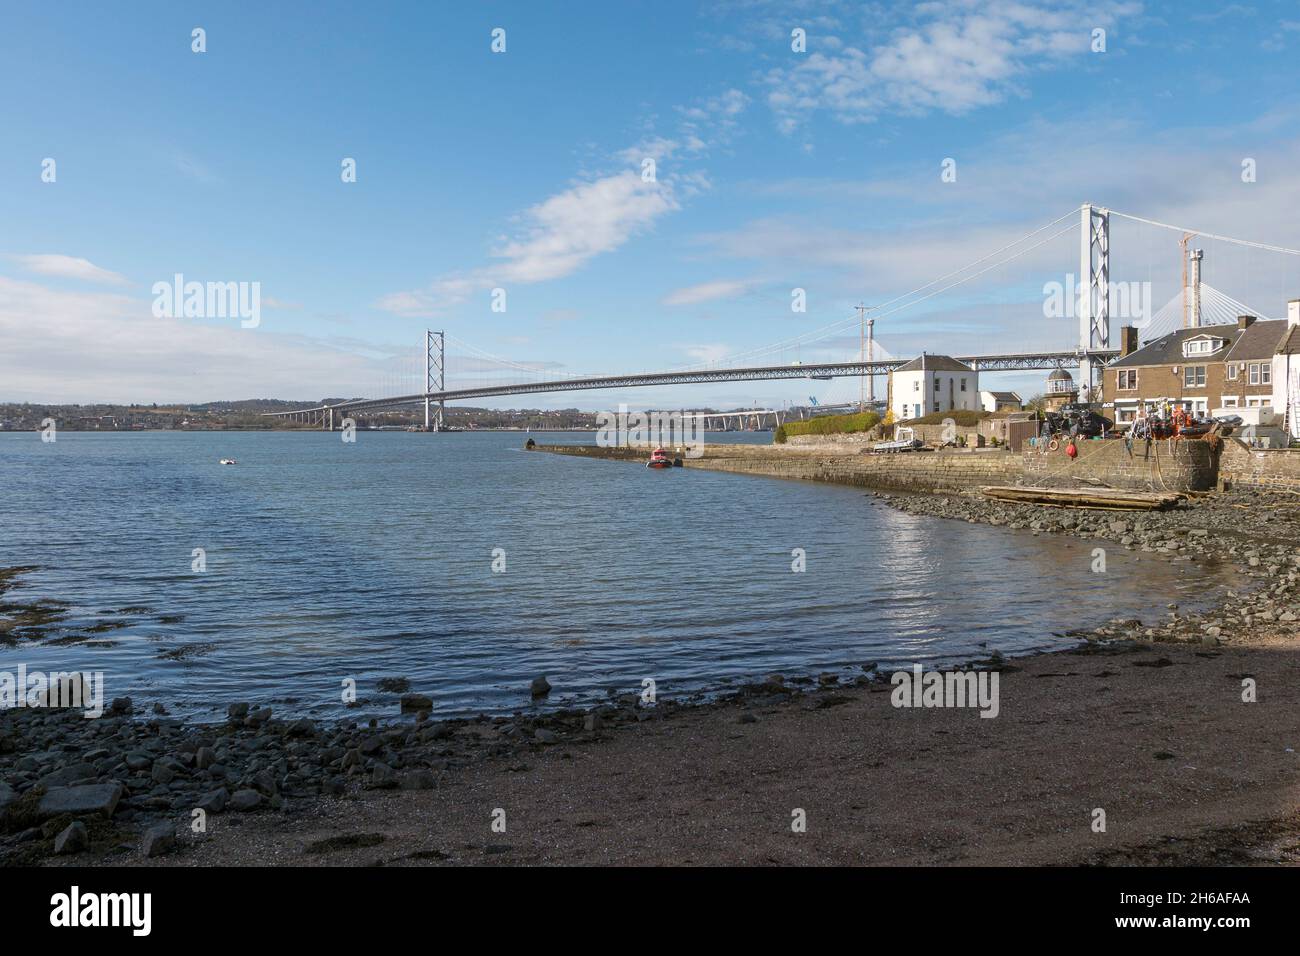 The Forth Road Bridge, seen from the Fife Coastal Path in North Queensferry, Fife, Scotland. Stock Photo